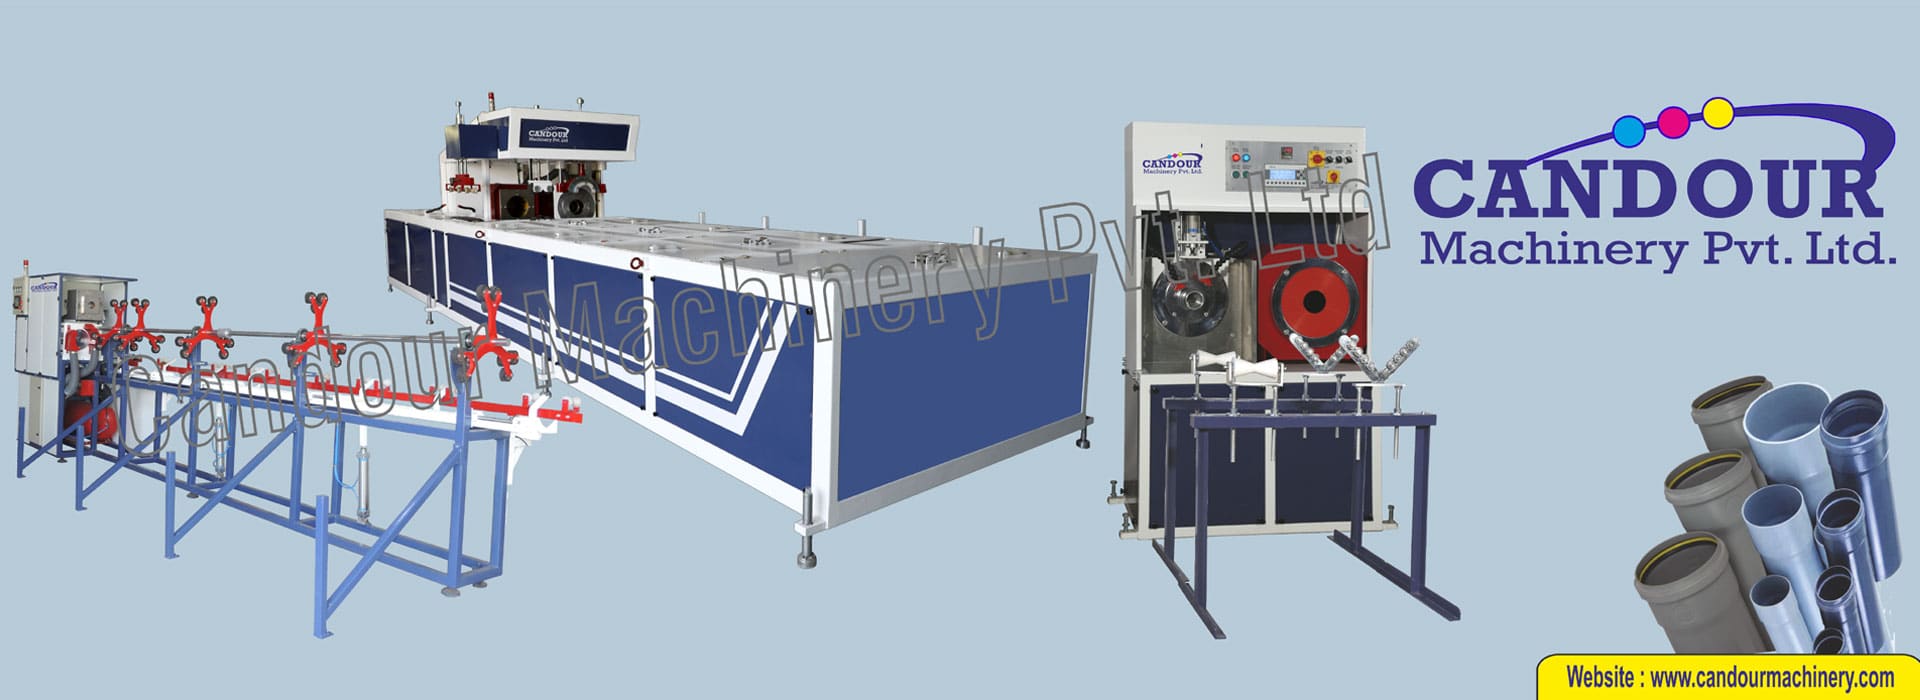 online PVC pipe socketing machine manufacture and exporter by candour machinery